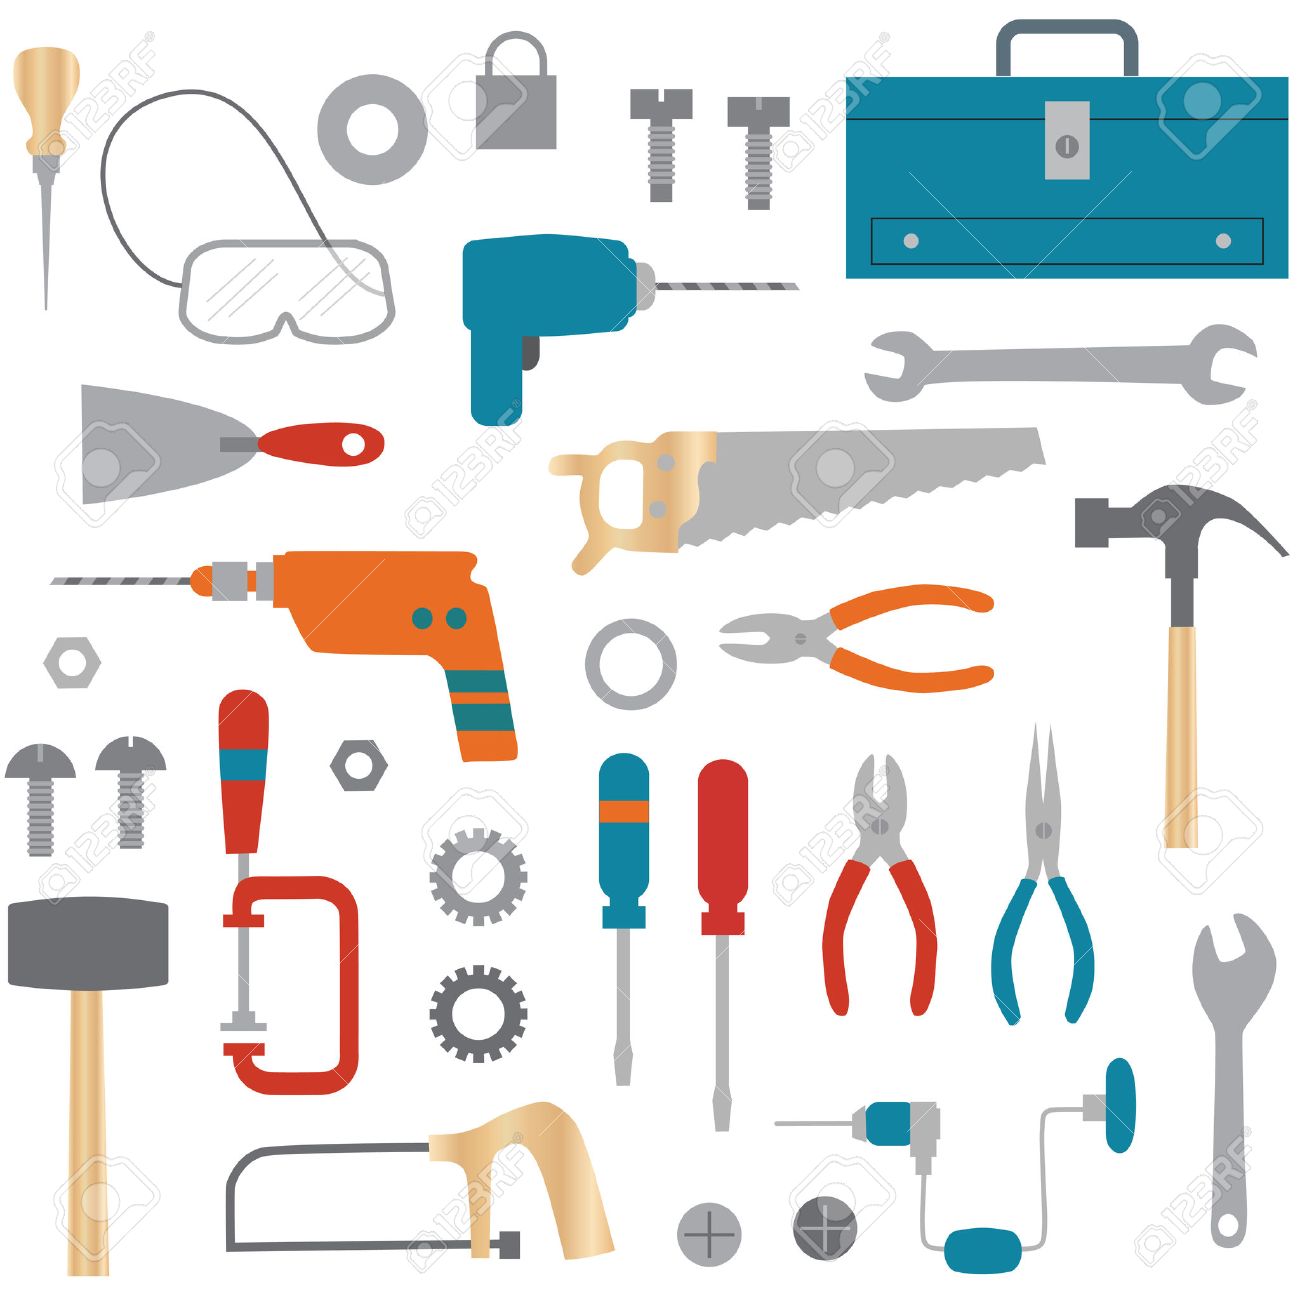 Tools illustrations and clipa